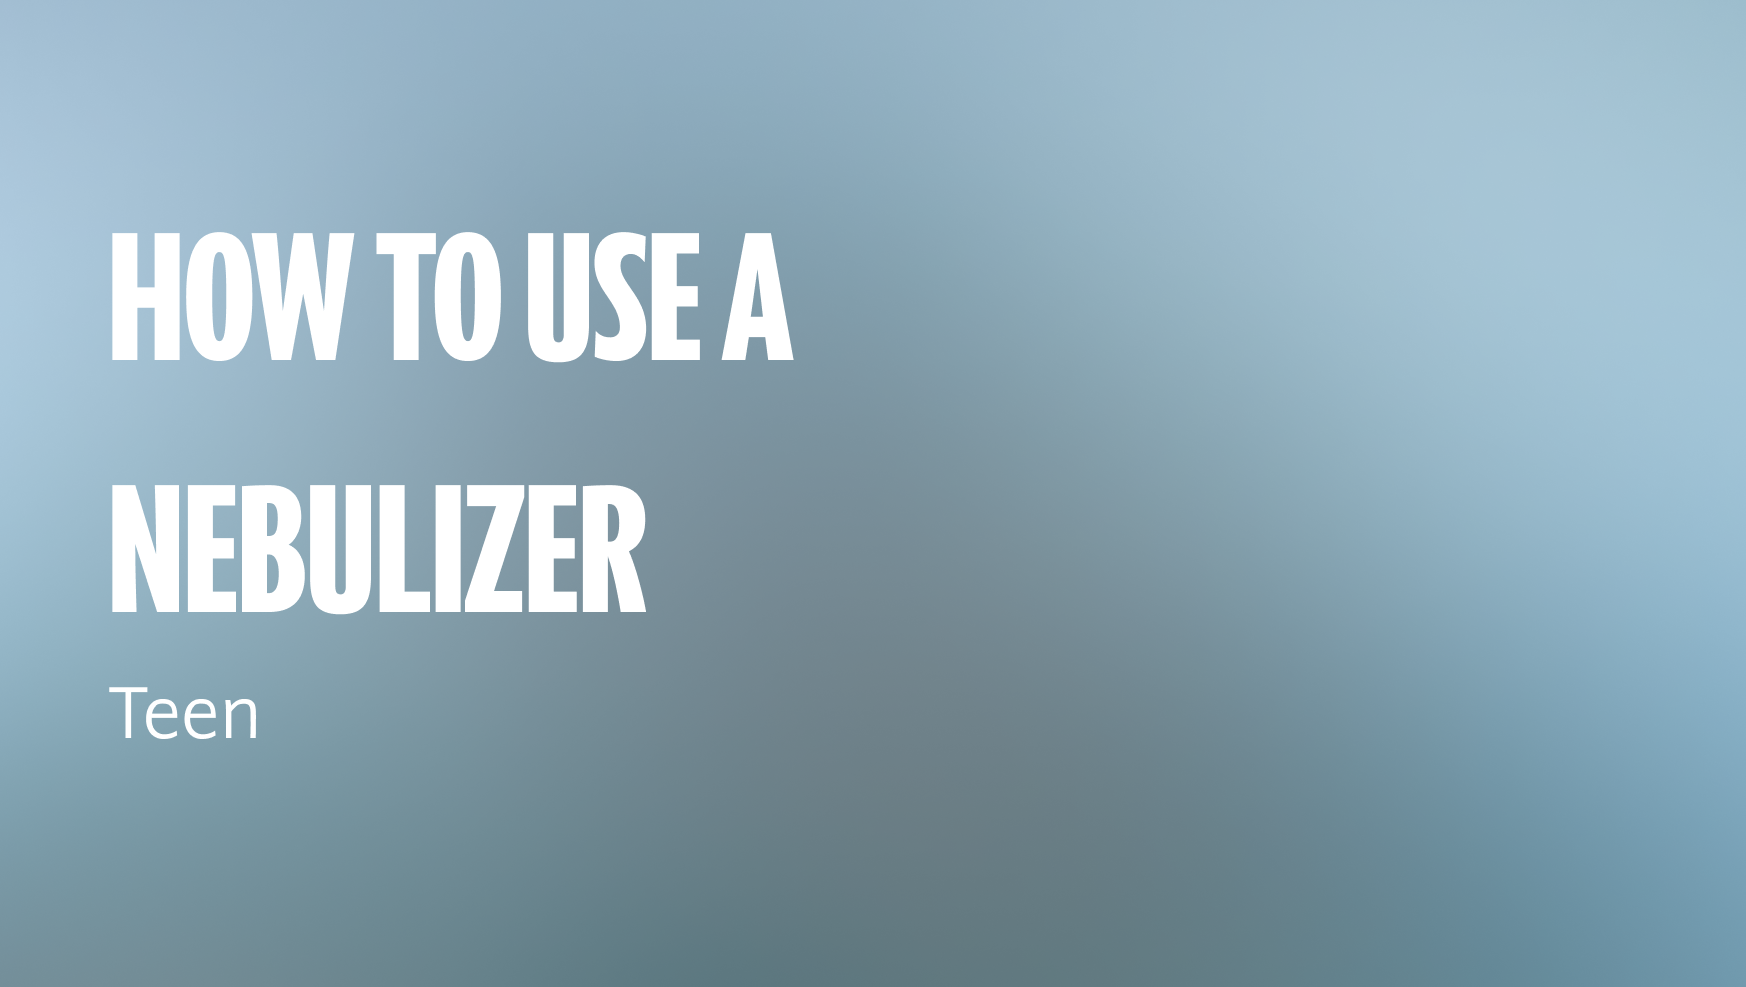 How to Use a Nebulizer (Teen)